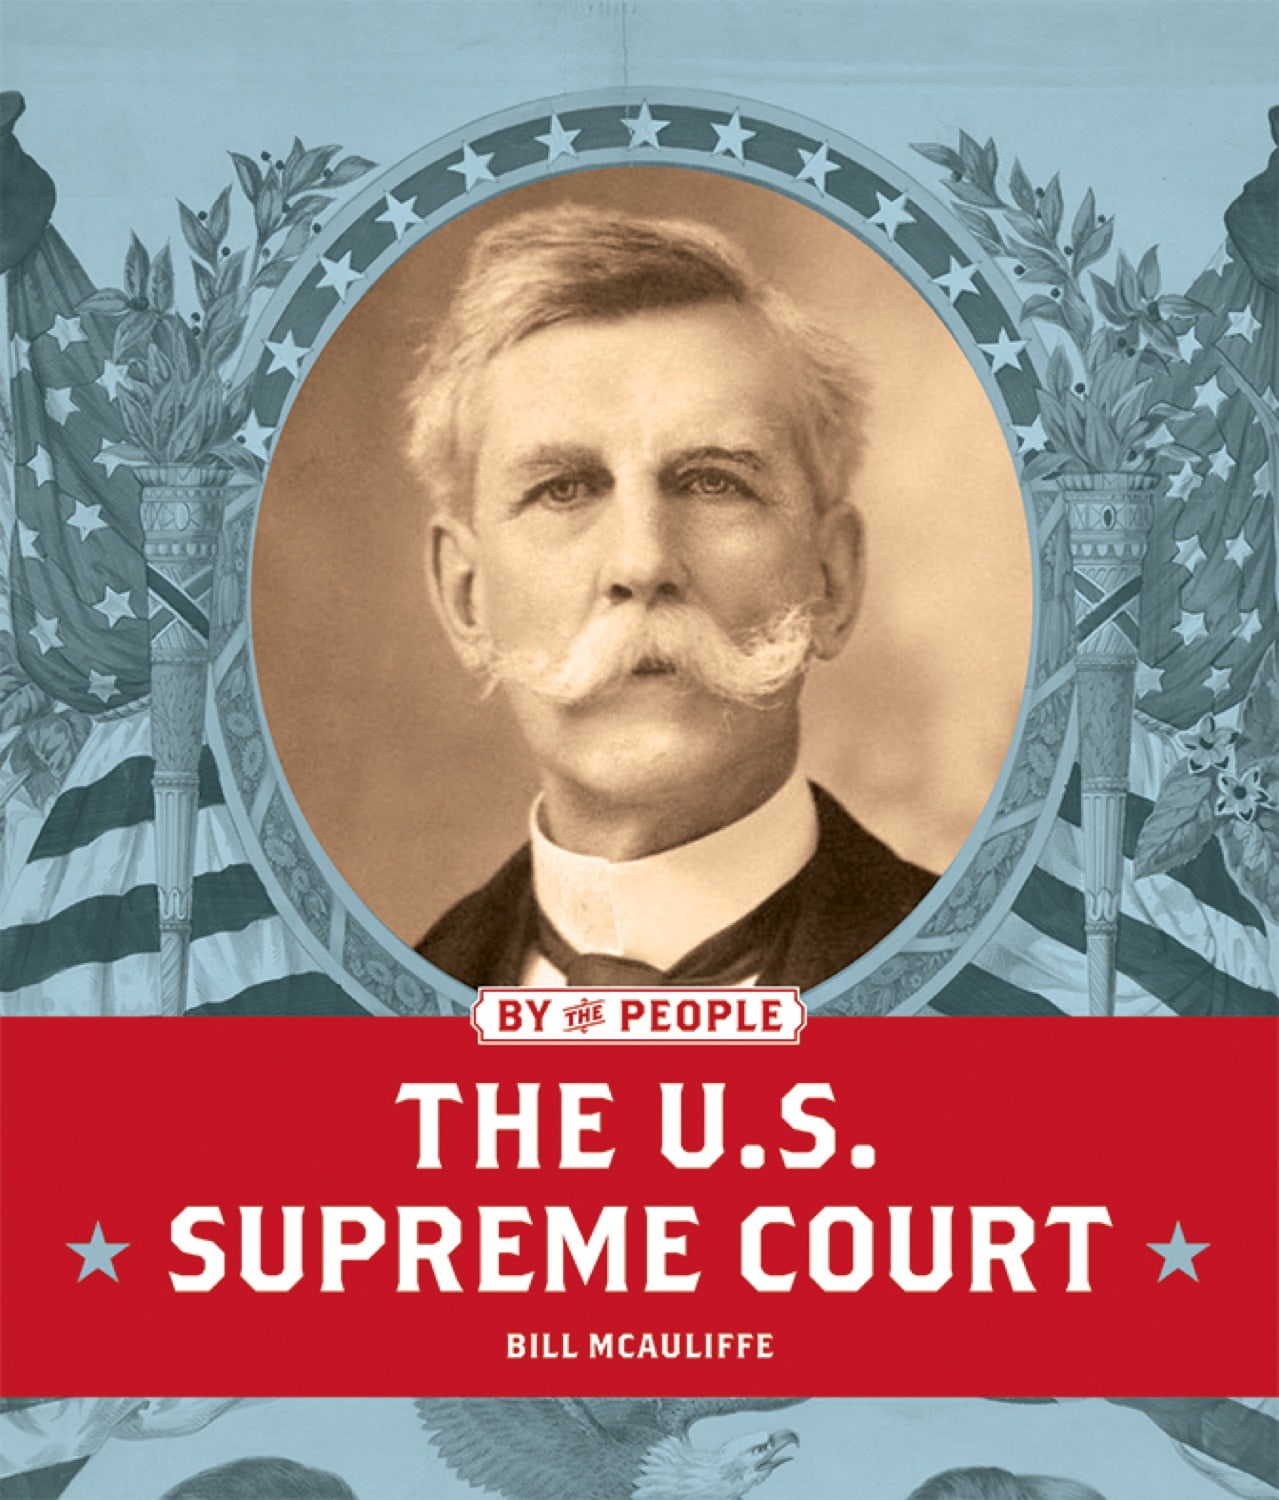 By the People: U.S. Supreme Court, The